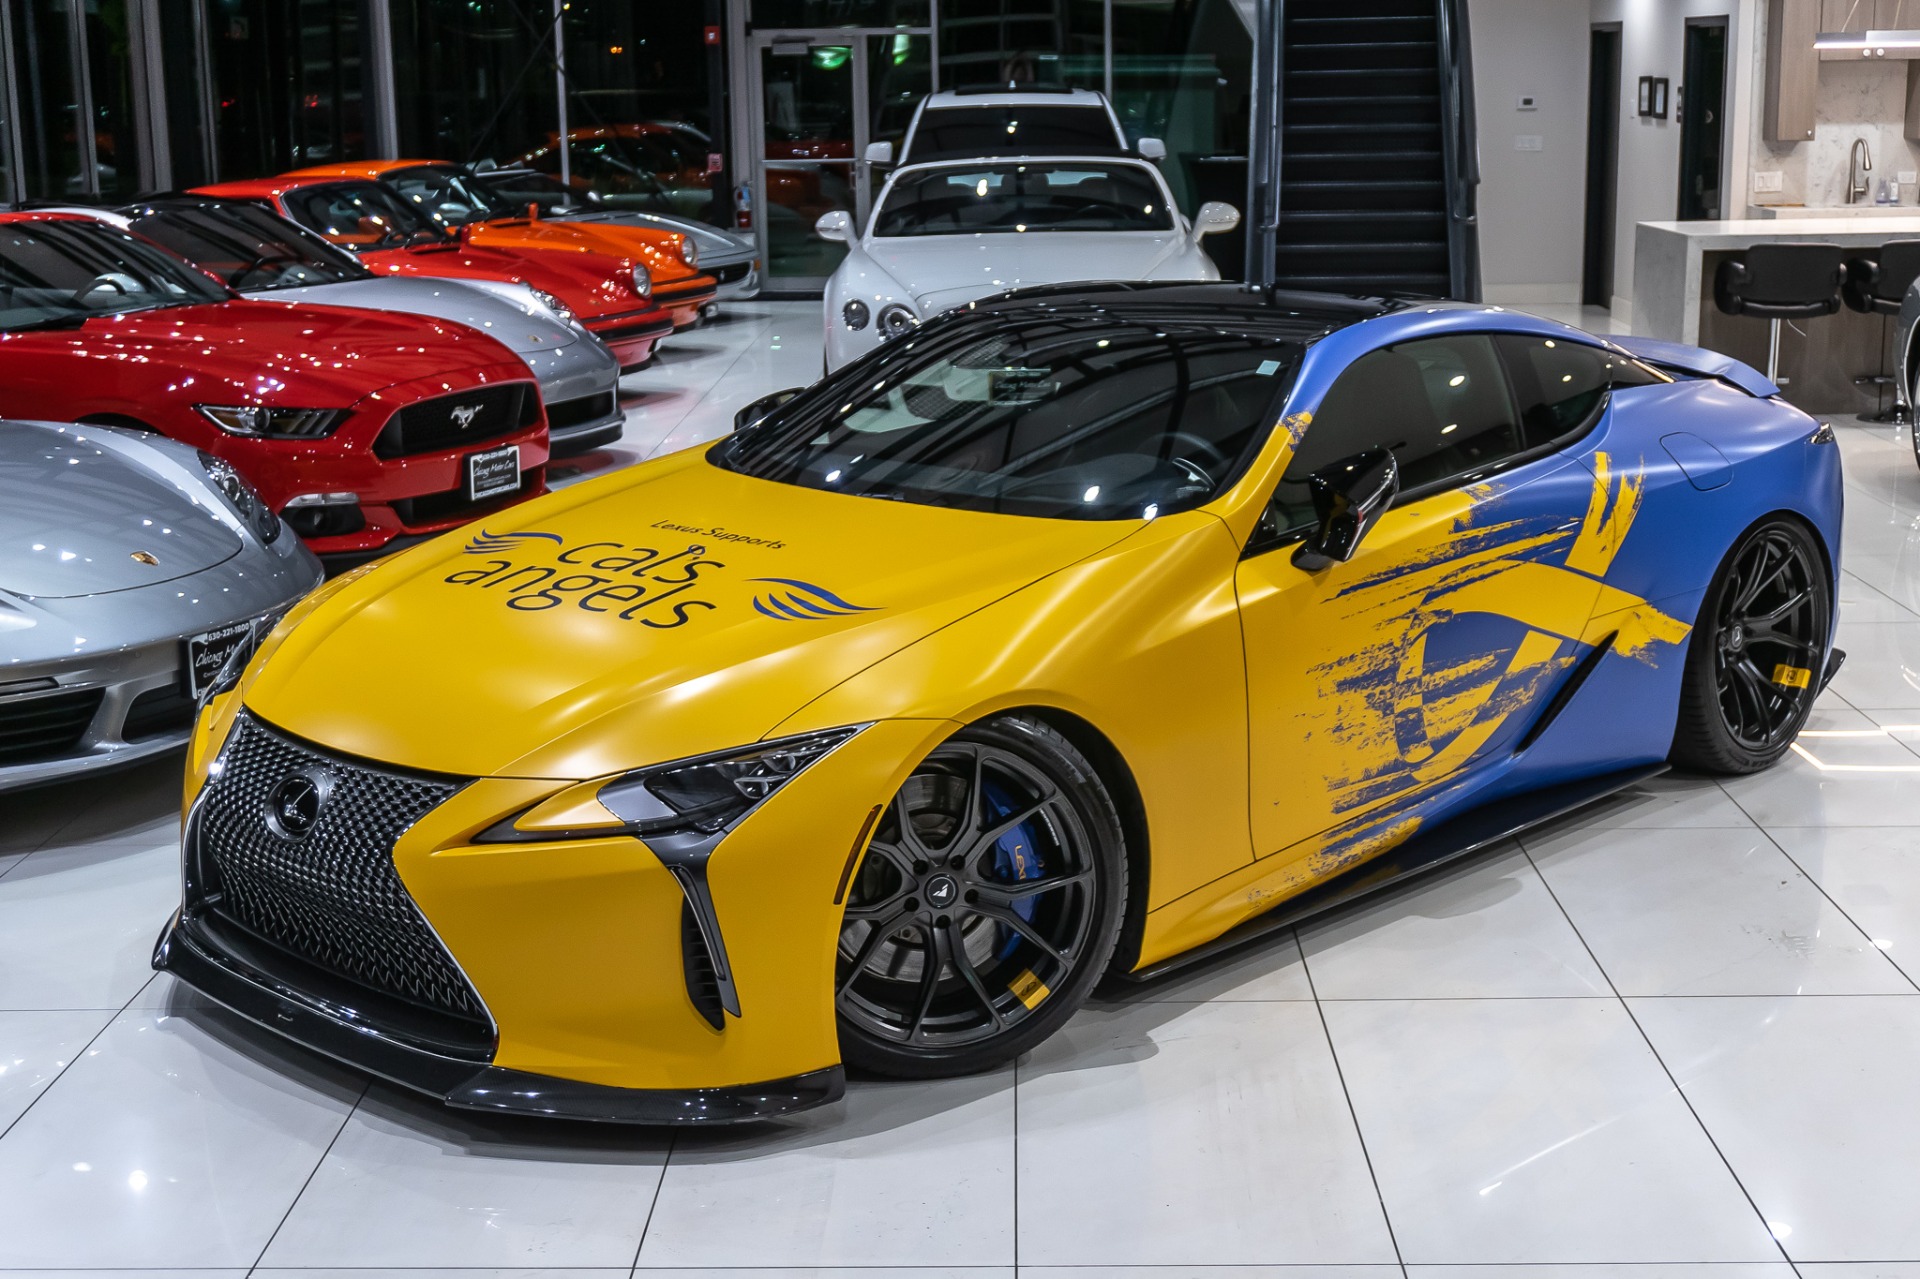 Used 2020 Lexus LC 500 Custom Build Cals Angels Wrapped In Hope Project 